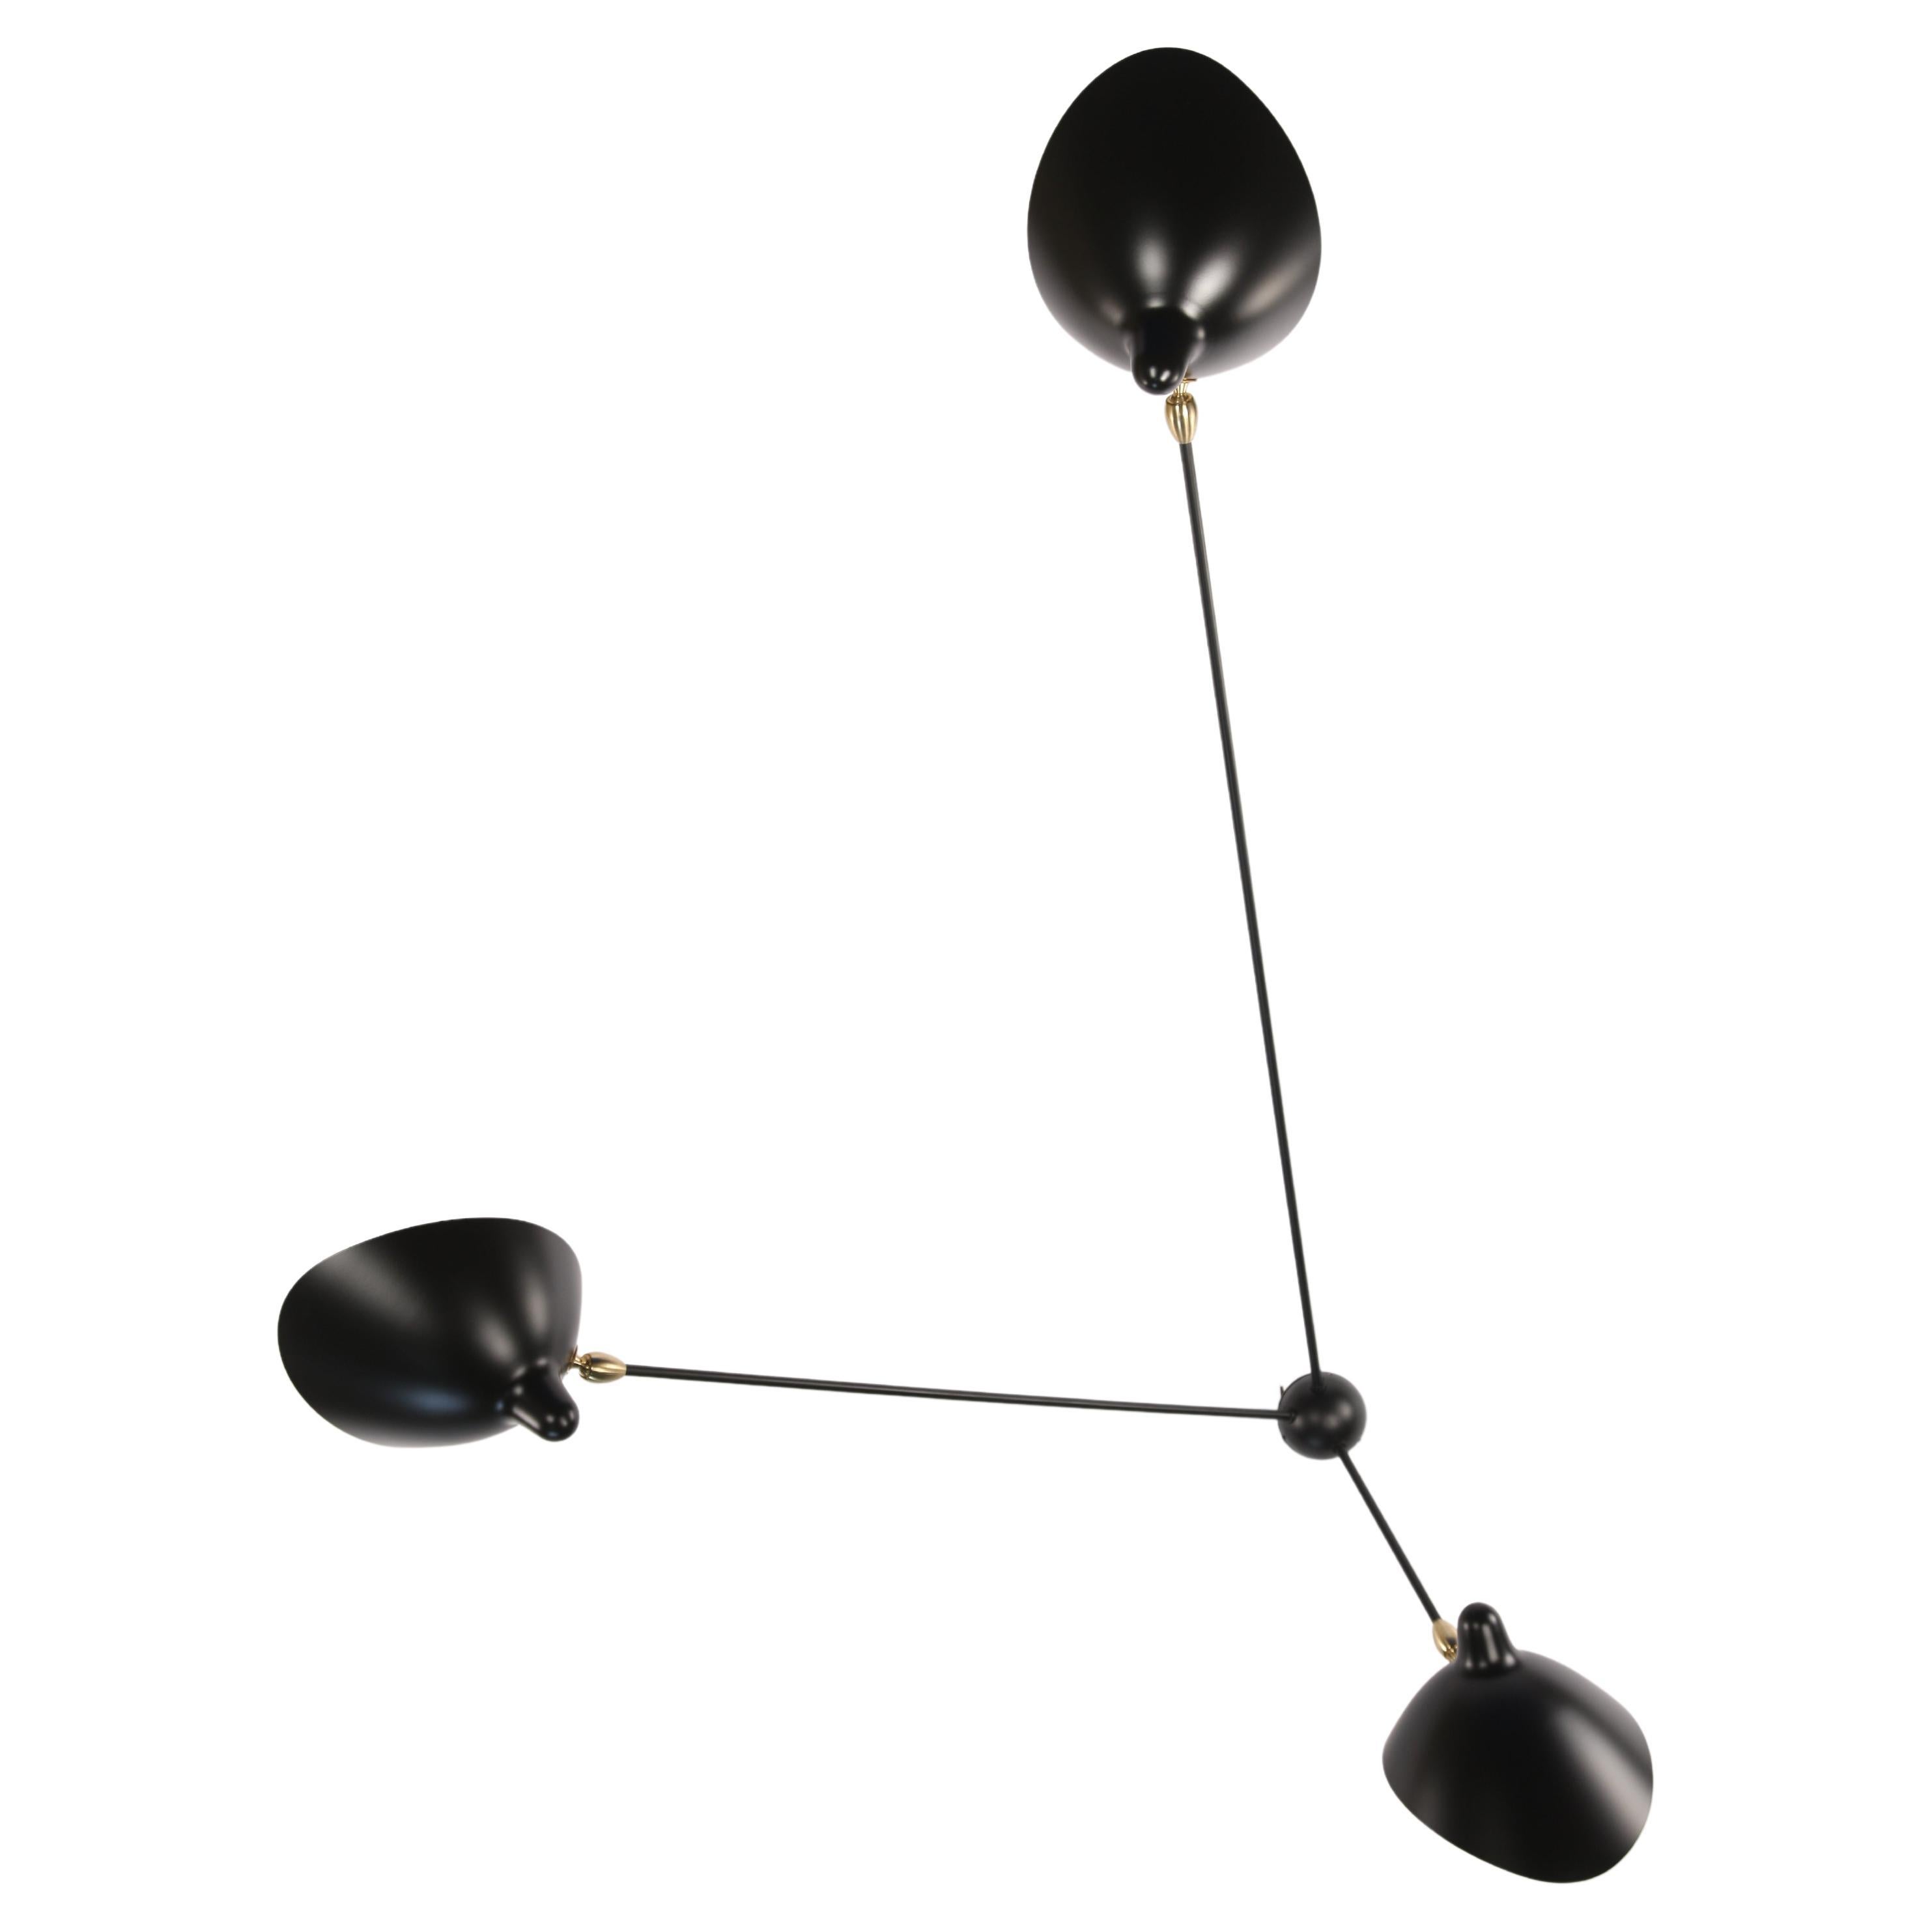 Sconce Serge Mouille Model "Applique Spider 3 Arms" in Black or White For Sale